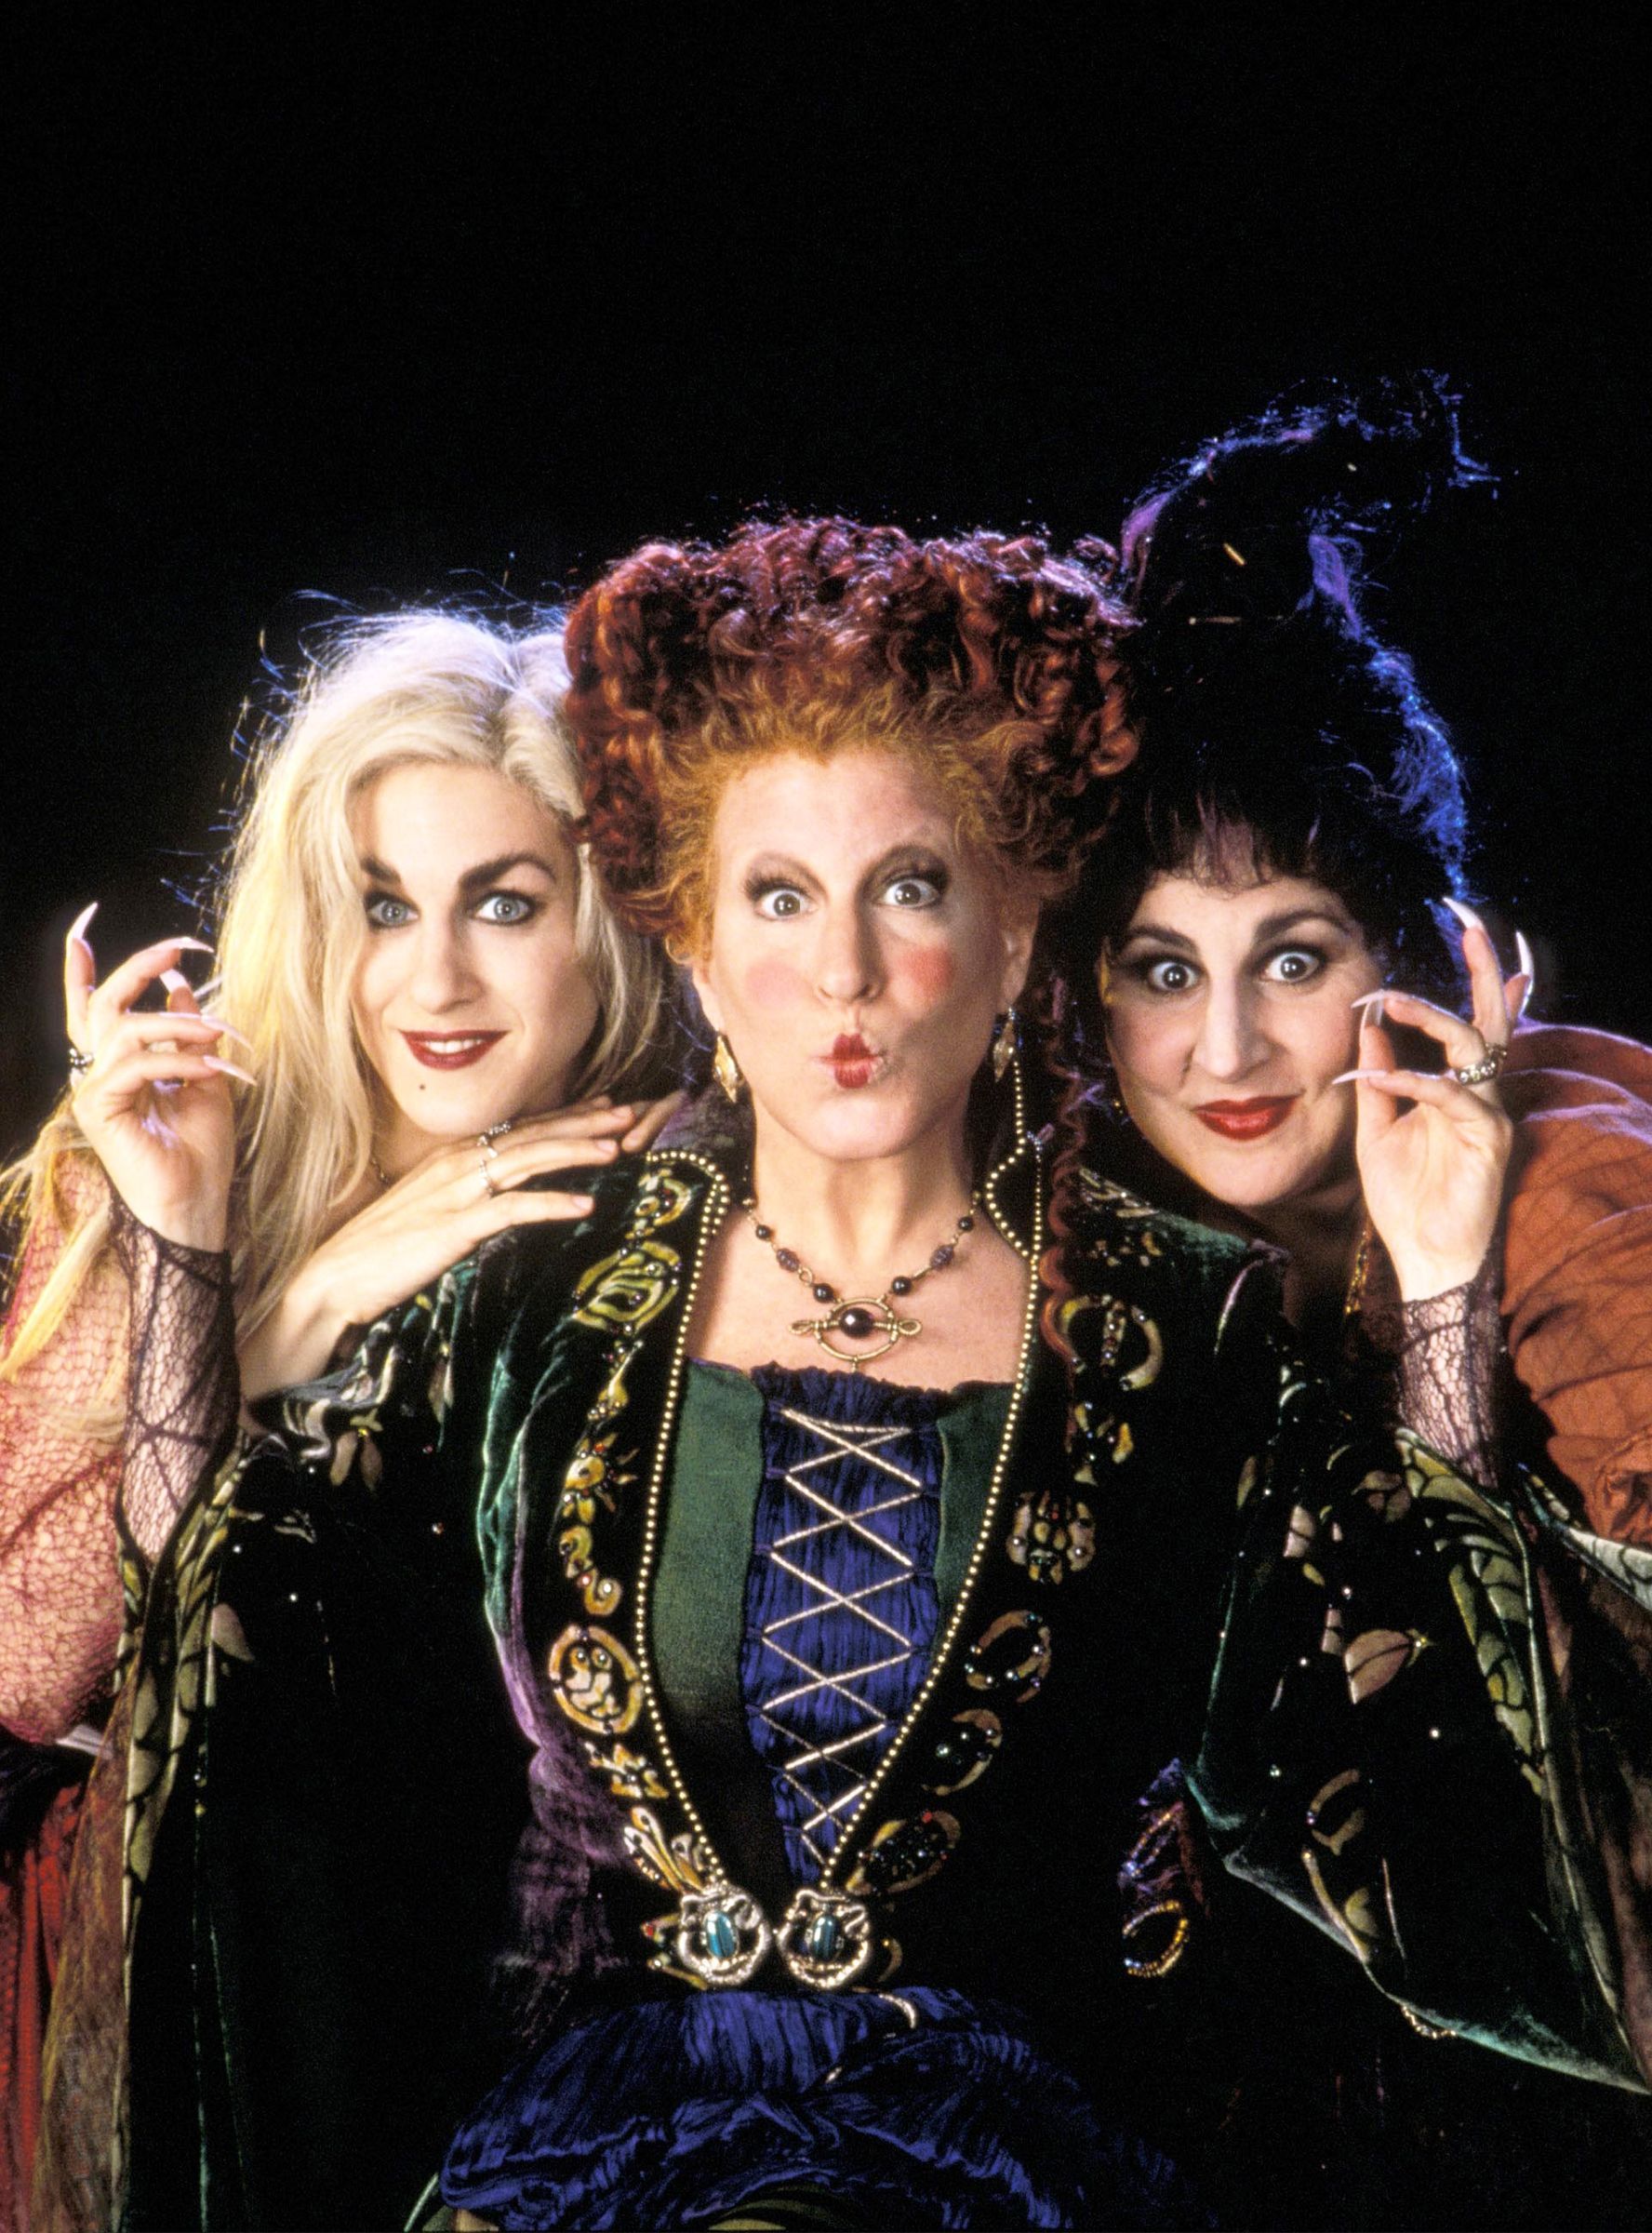 Bet You Didn't Remember This One Very Adult Aspect Of "Hocus Pocus"